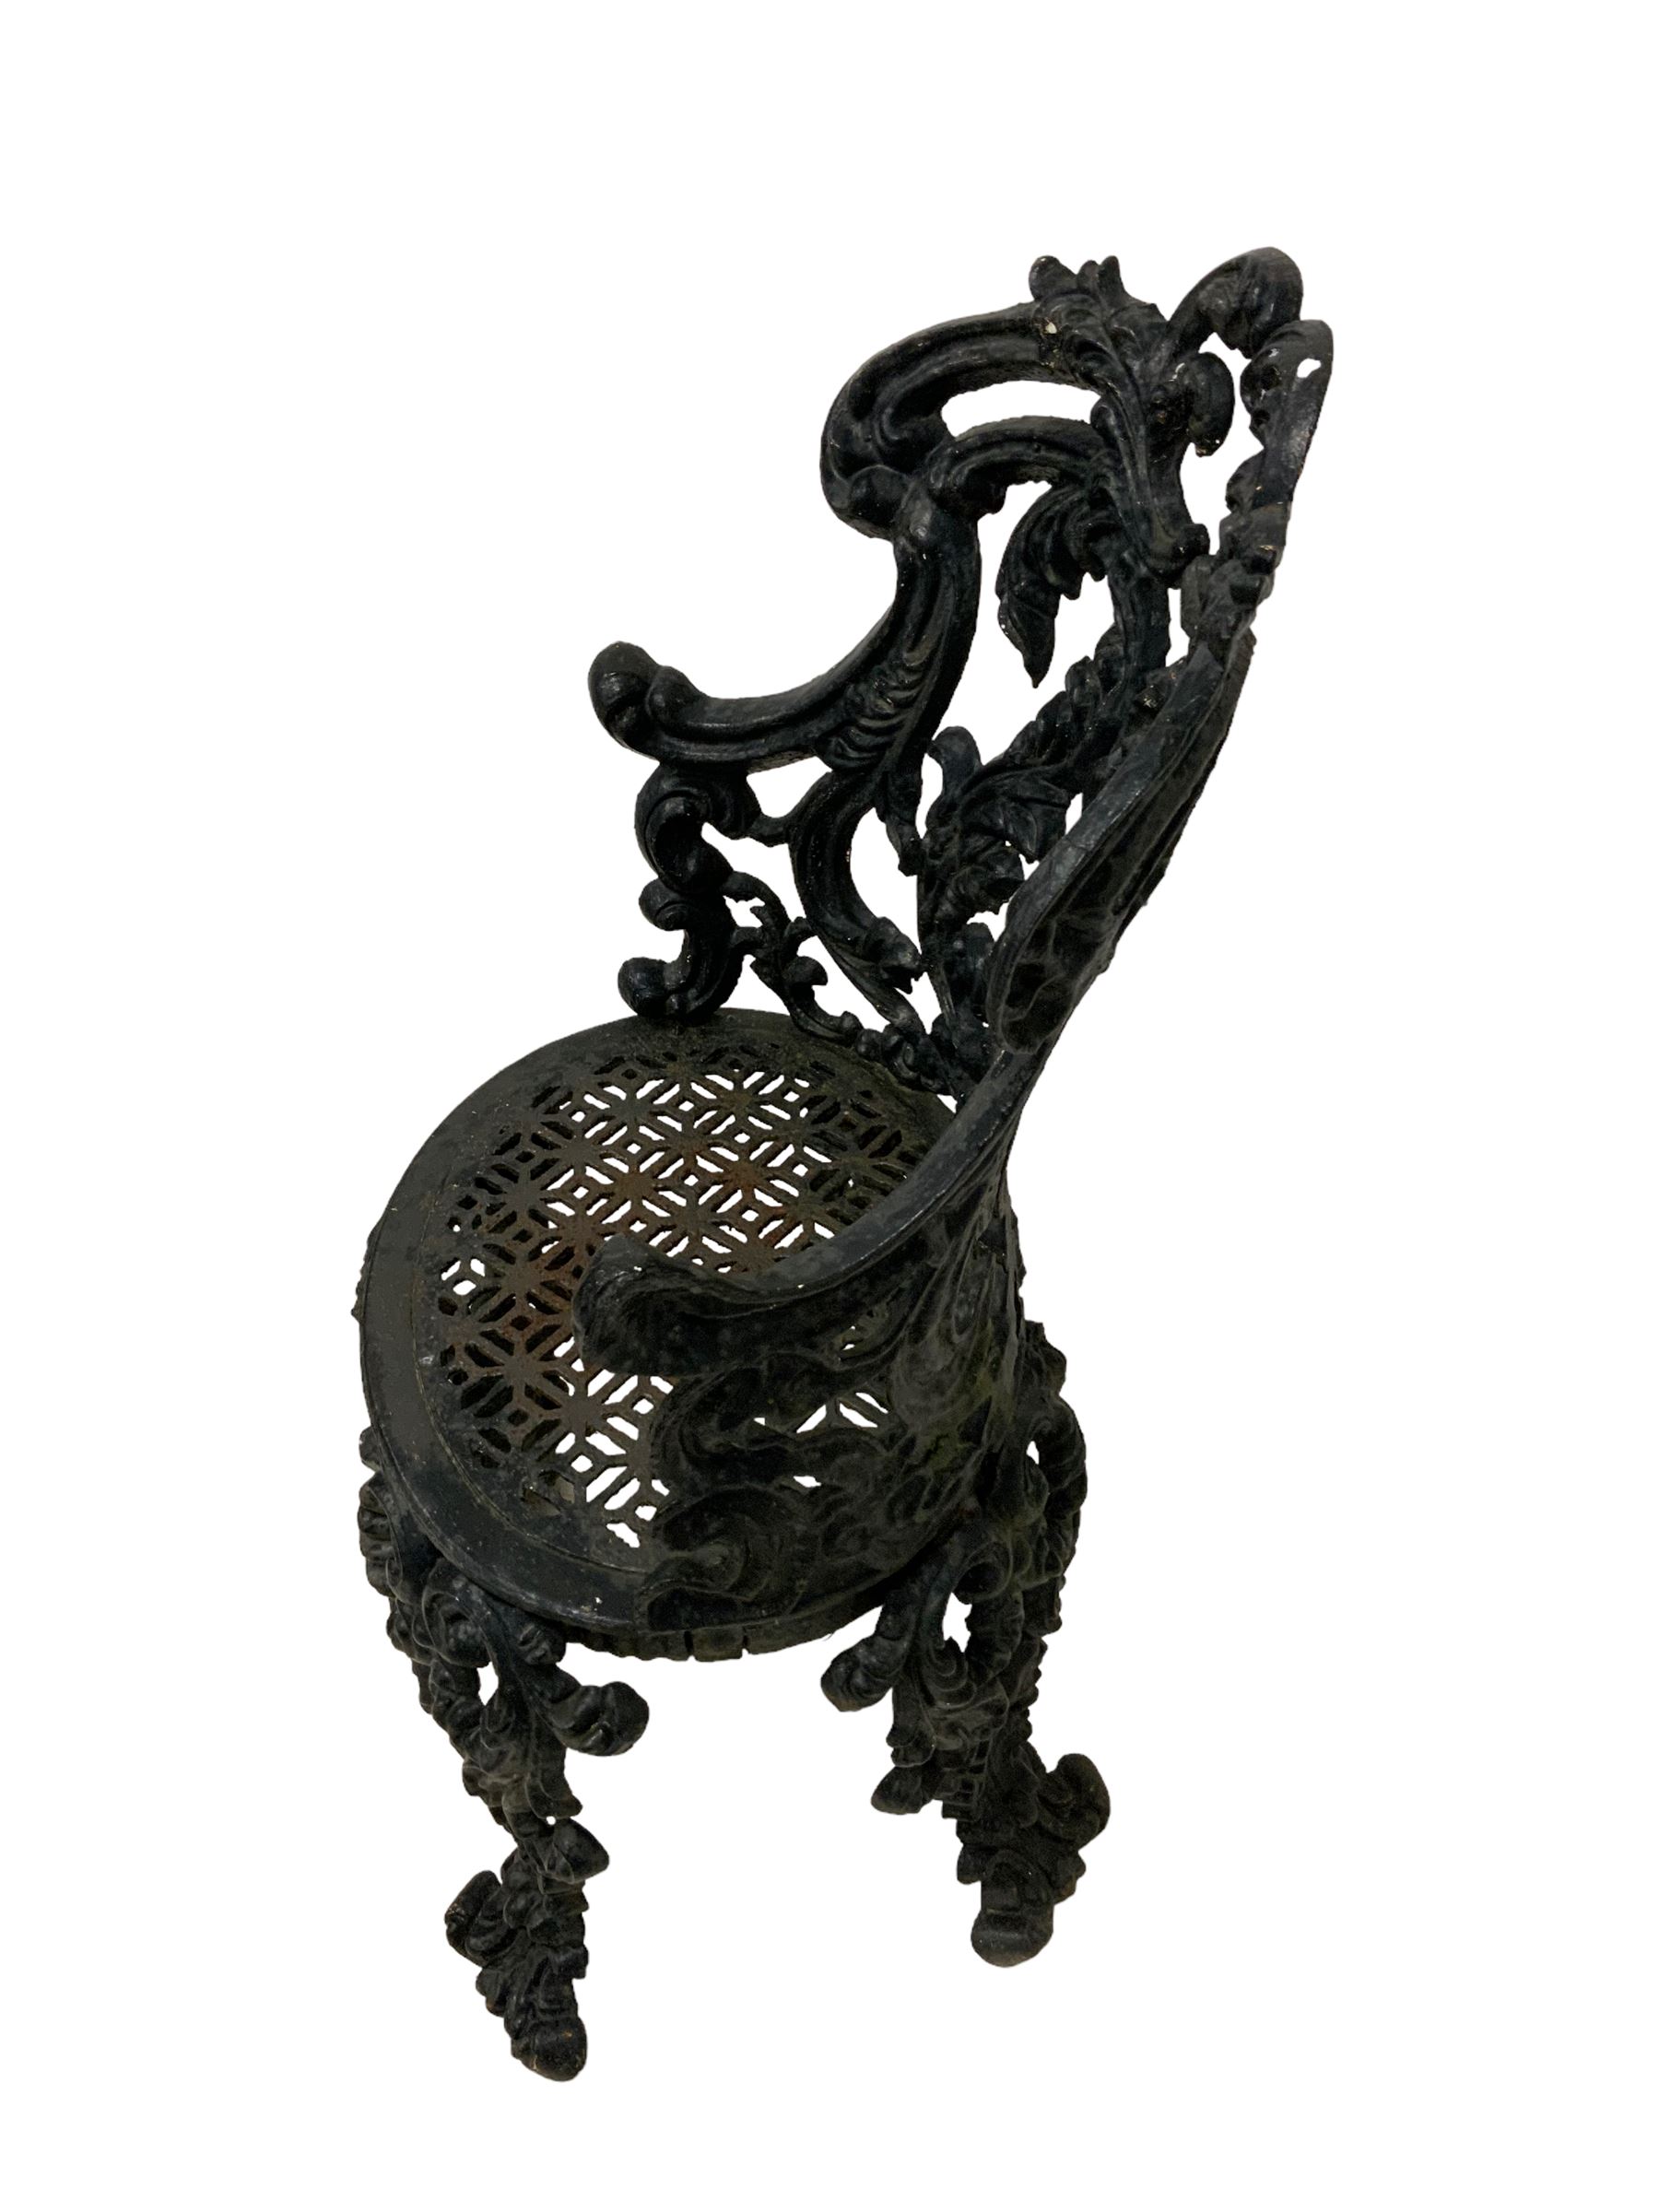 Late 19th century painted heavy ornate cast iron garden chair - Image 3 of 7